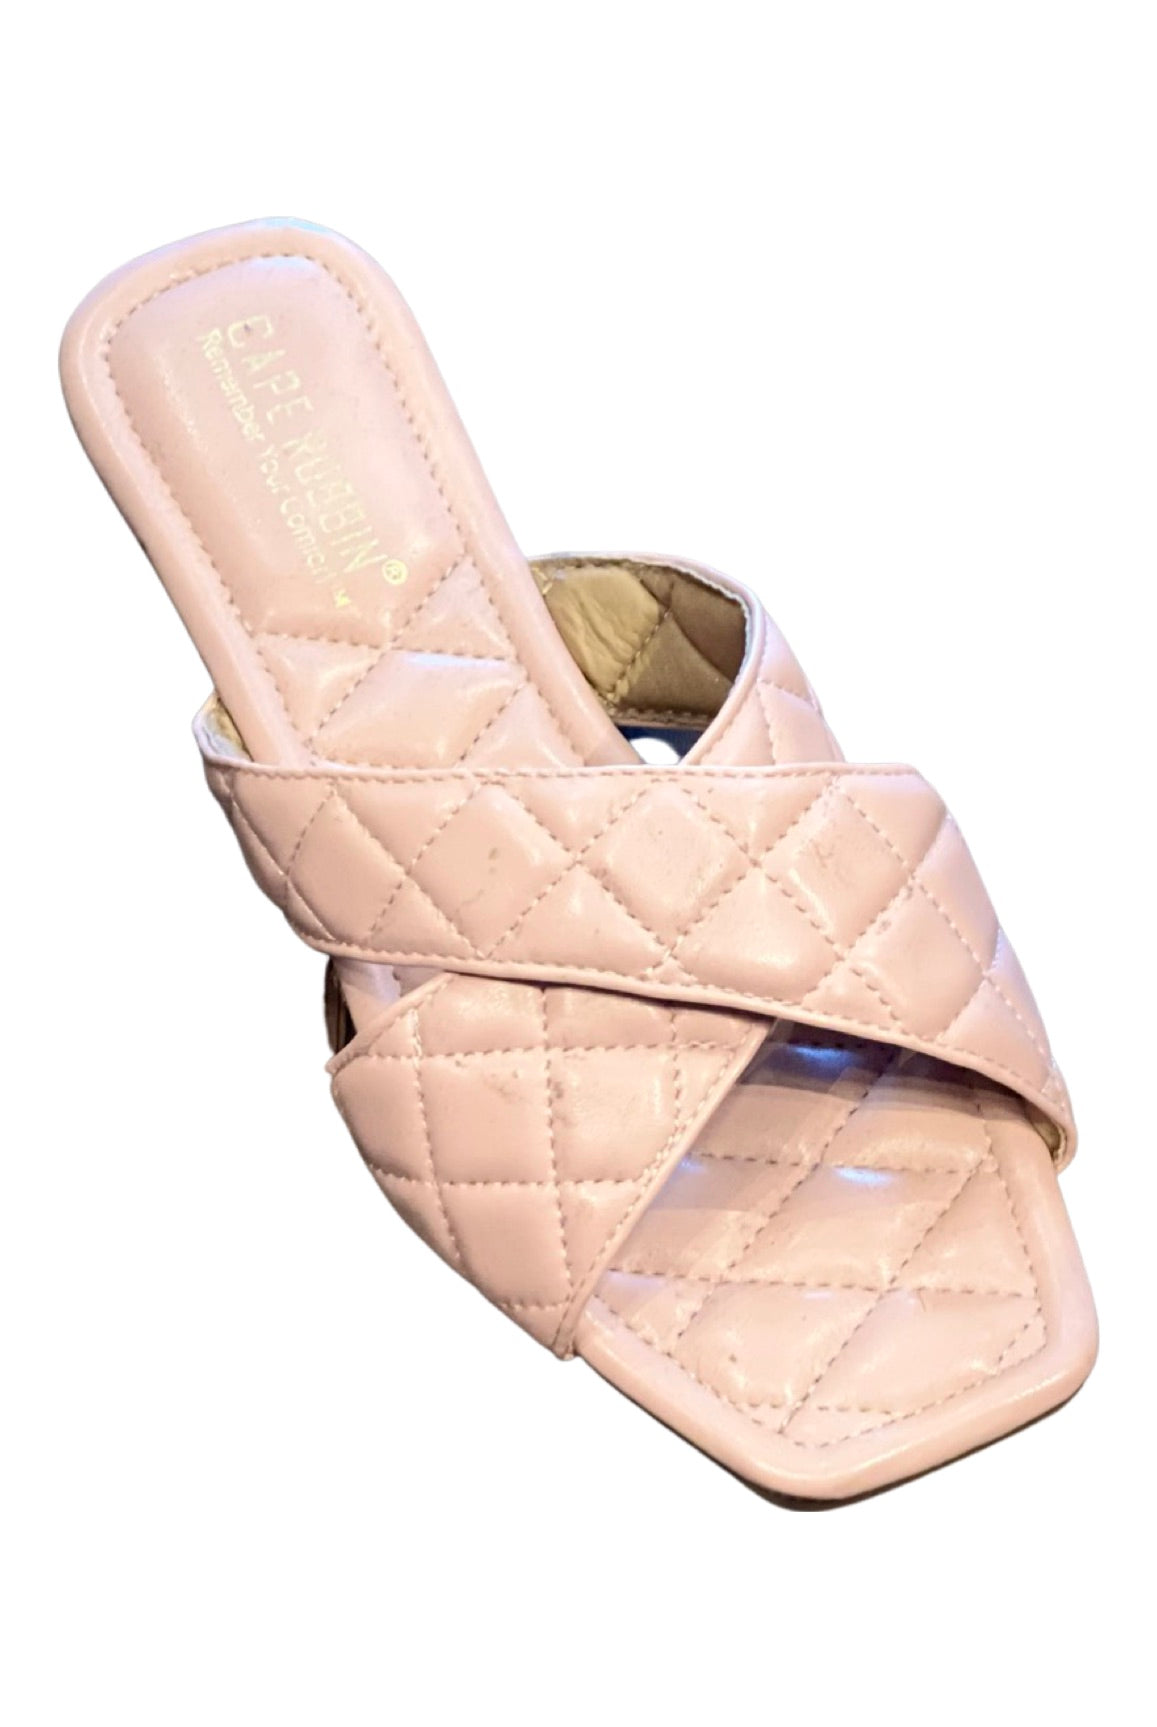 Alanis....Criss Cross Quilted Band Sandal Slides | Swagg Boutique LLC.